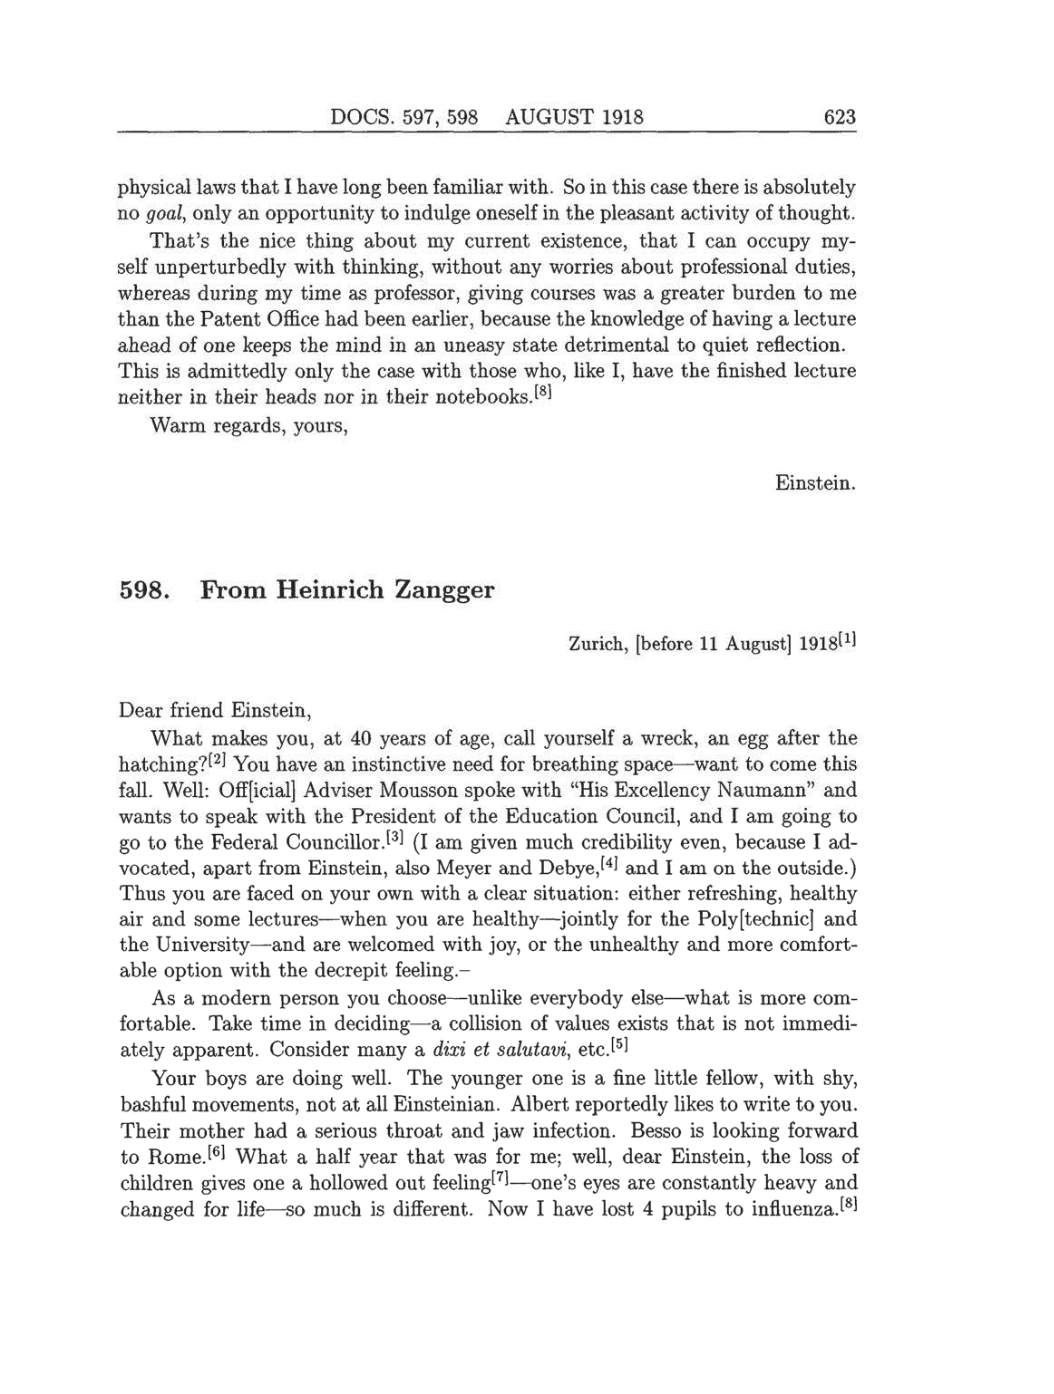 Volume 8: The Berlin Years: Correspondence, 1914-1918 (English translation supplement) page 623